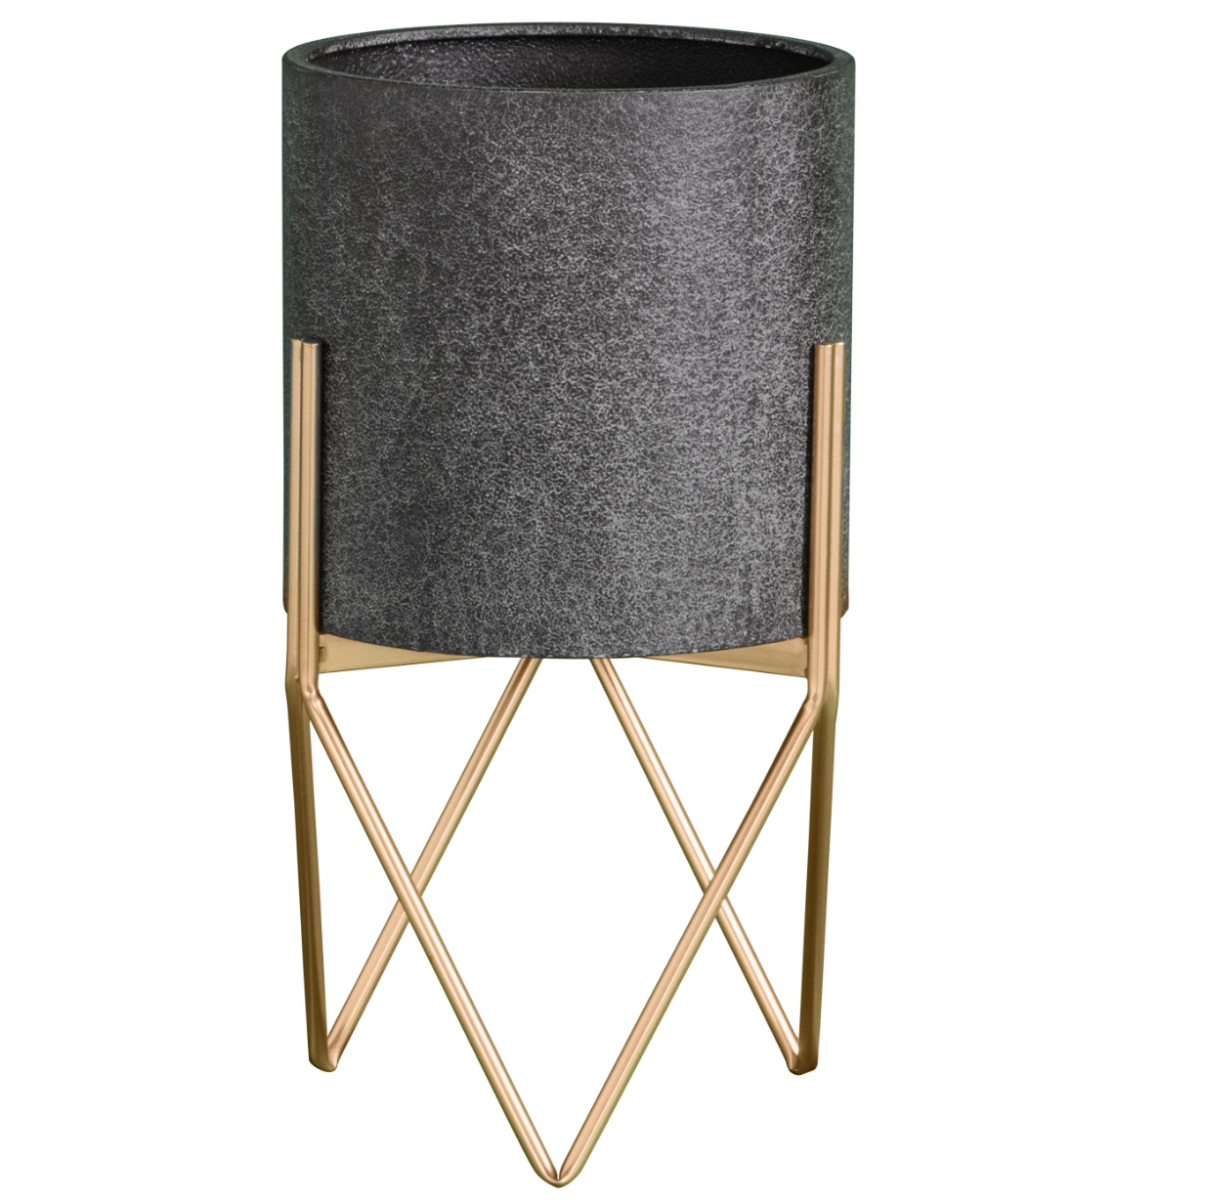 Hoven Metal Plant Stand